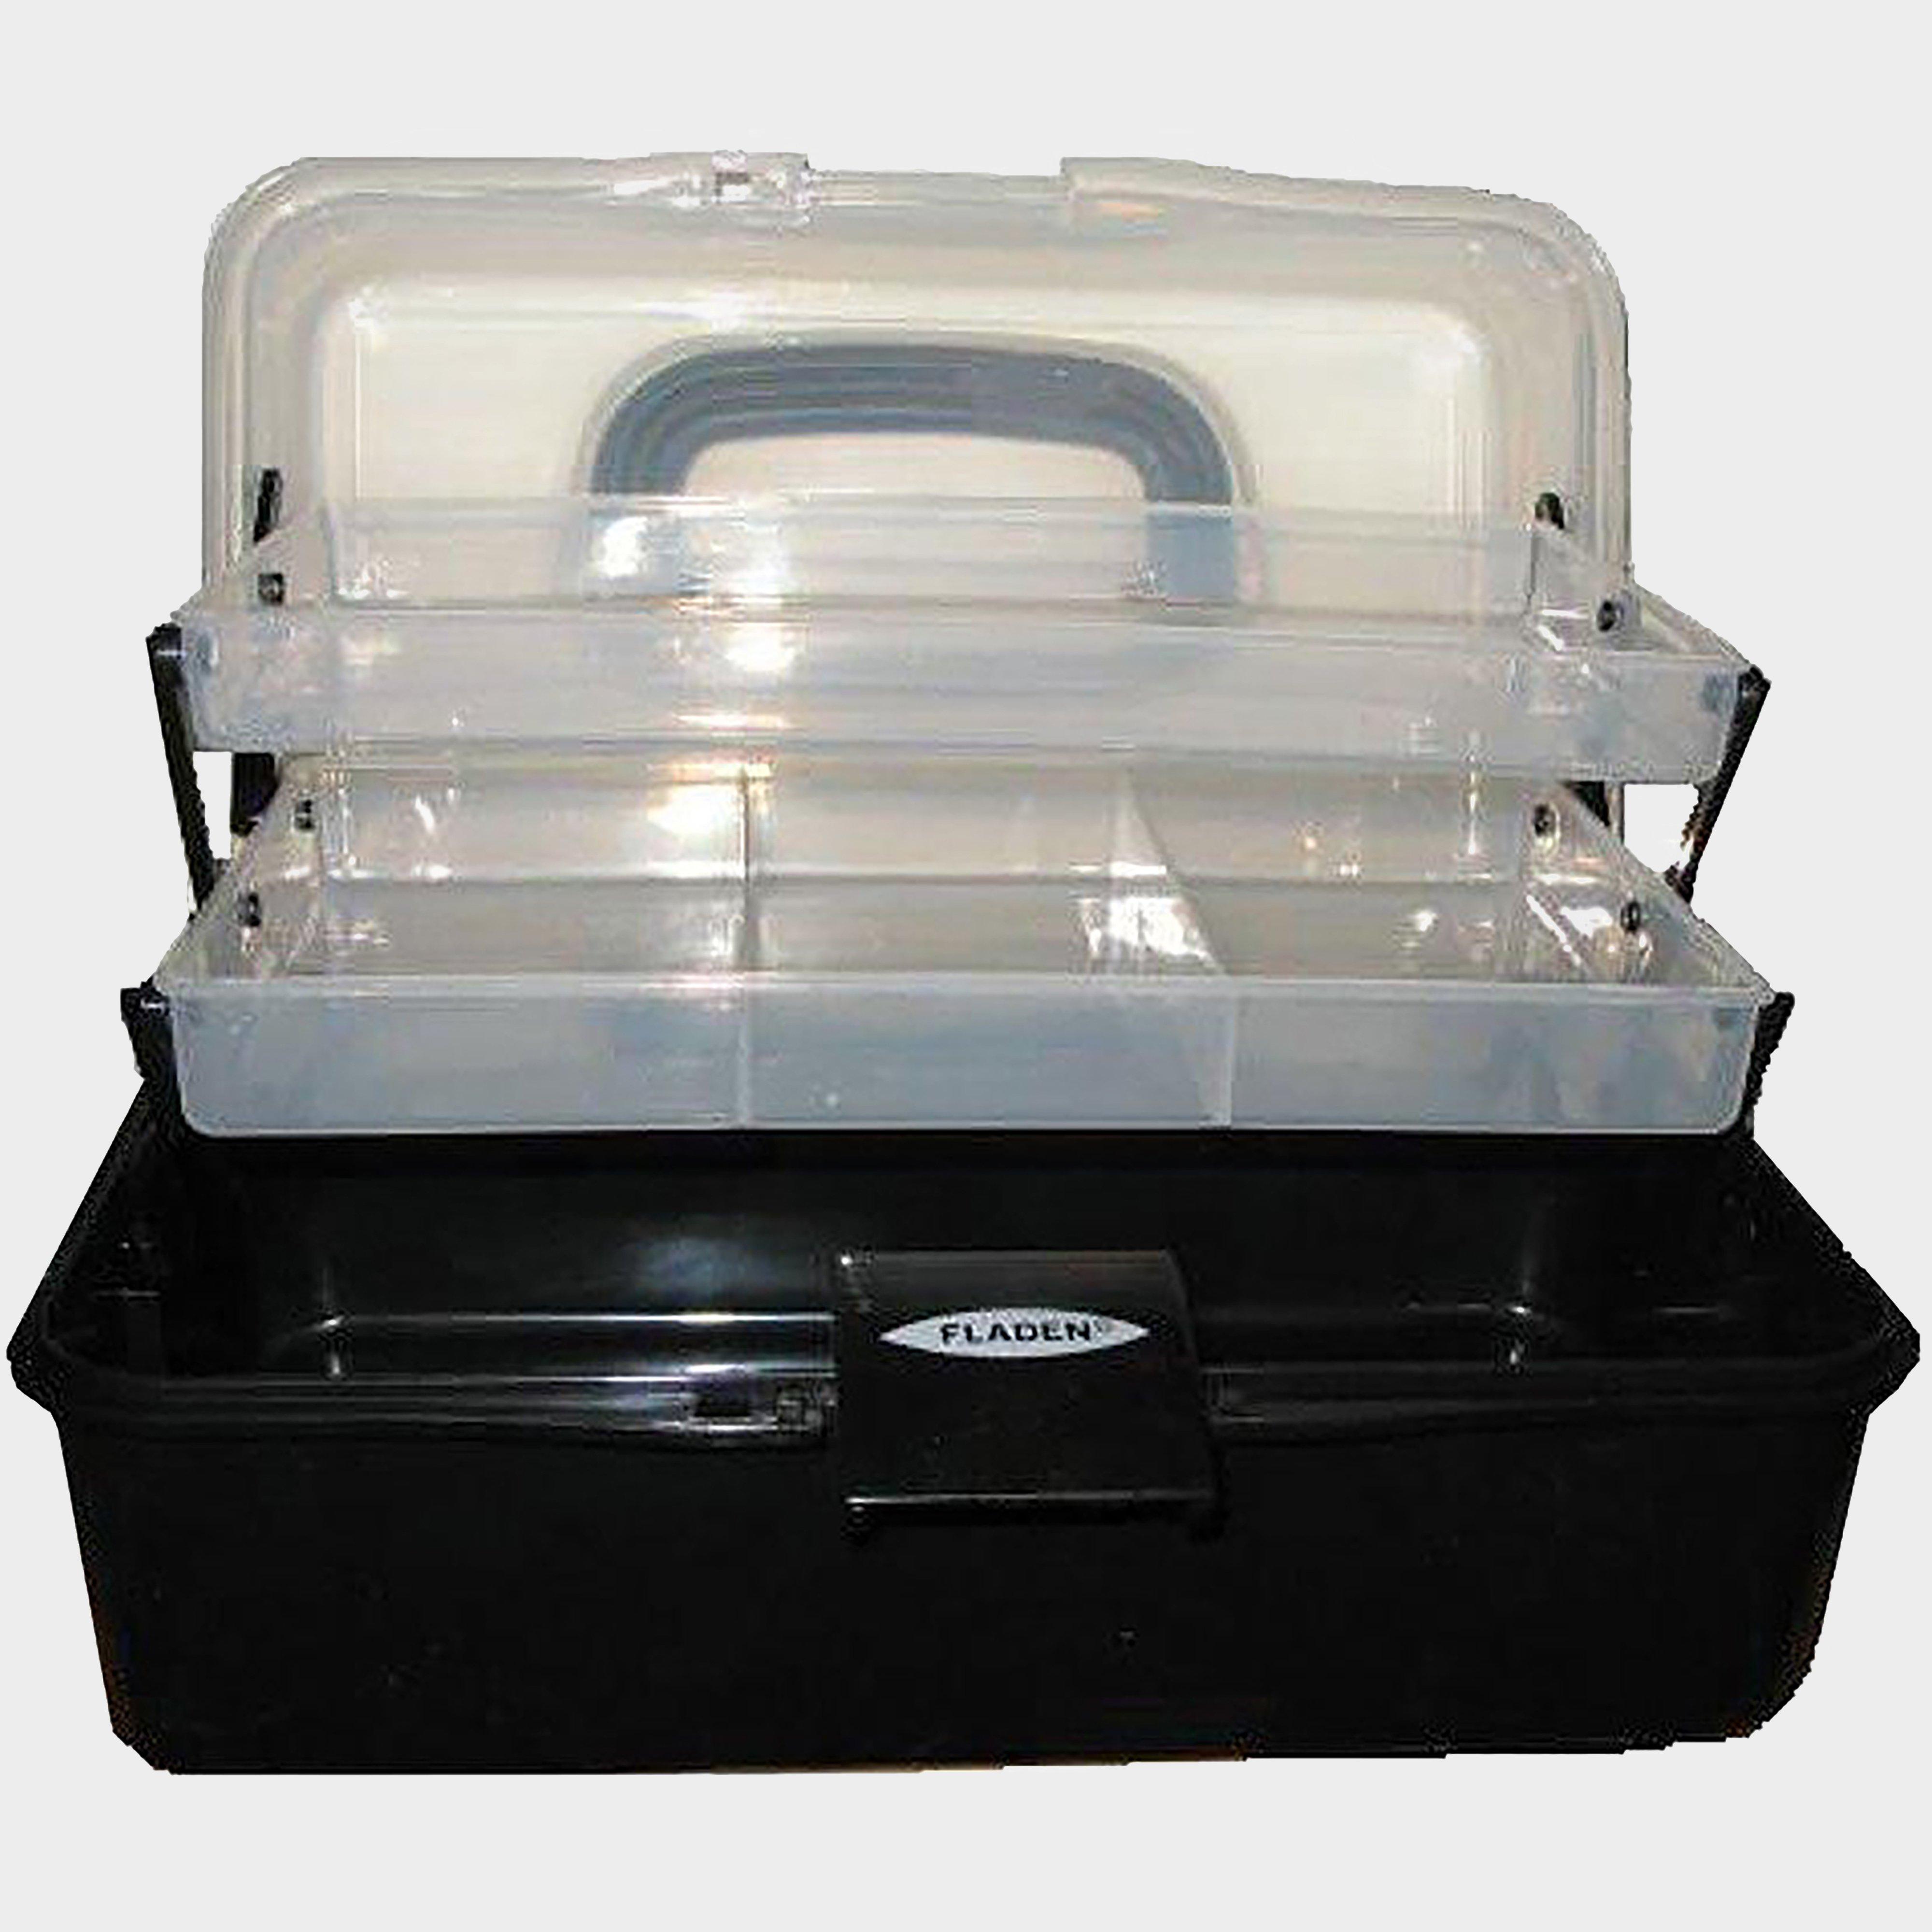 Fladen Two Tray Cantilever Box Large - Black/[m]  Black/[m]